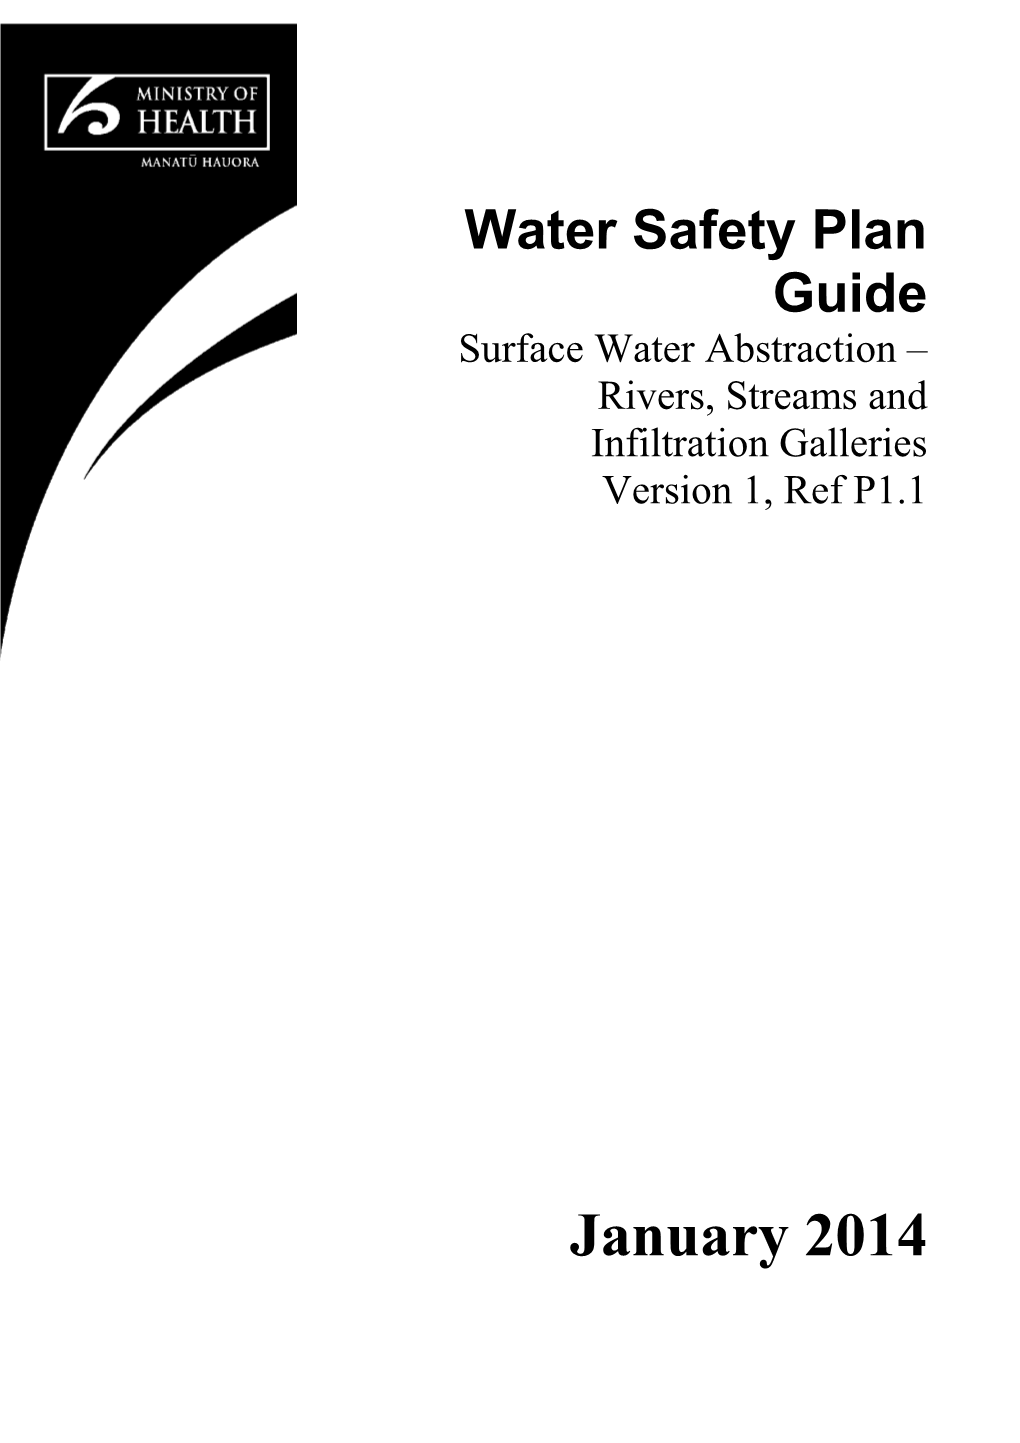 Water Safety Plan Guide: Surface Water Abstraction Rivers, Streams and Infiltration Galleries